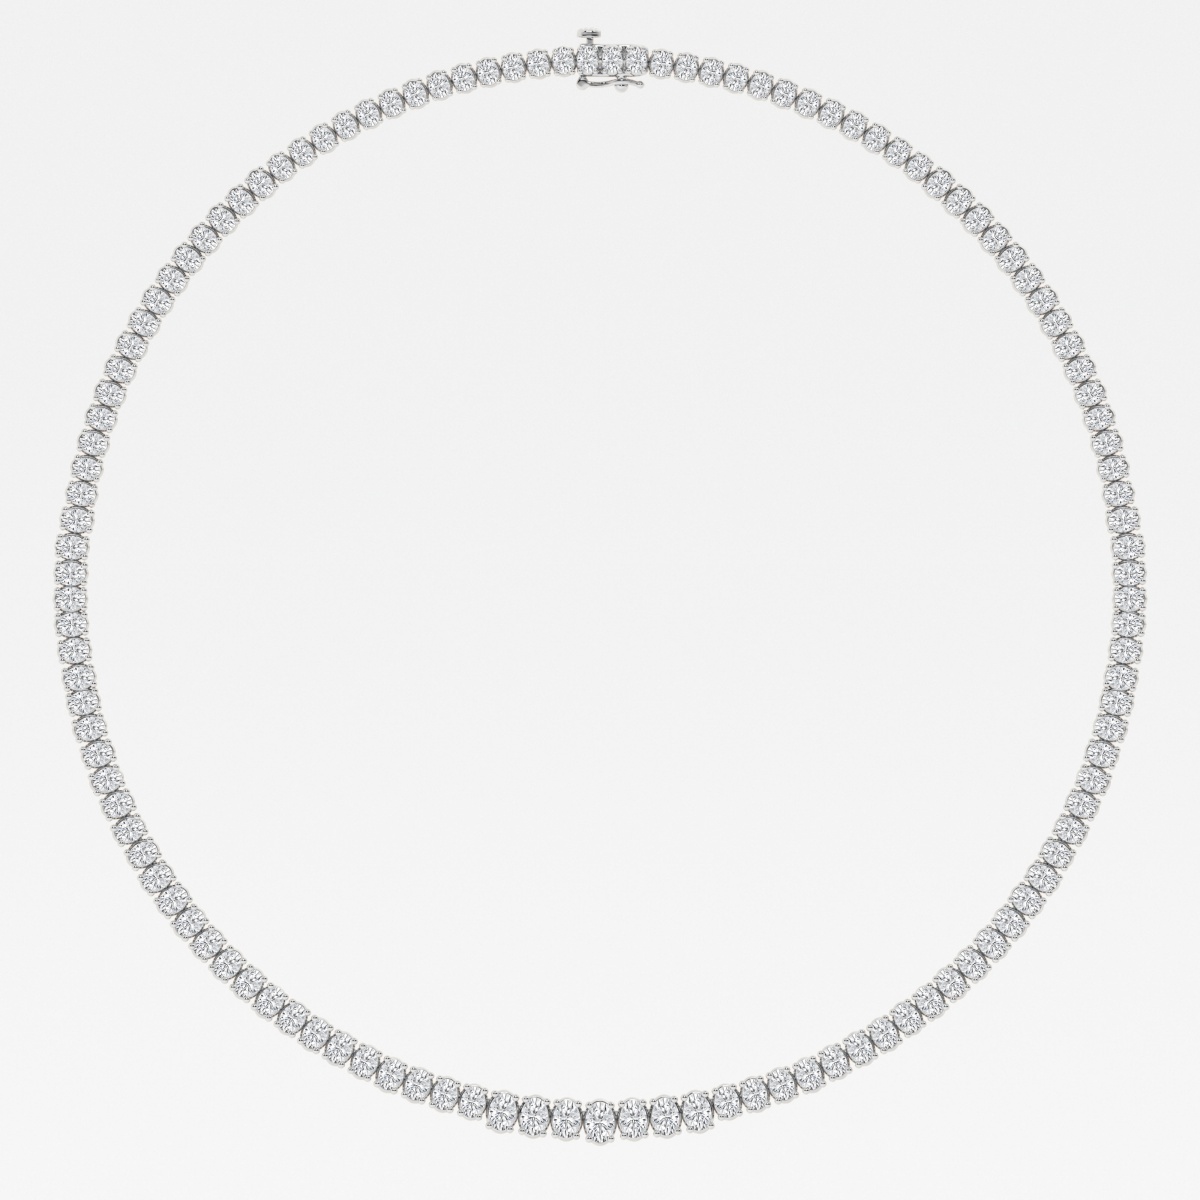 Additional Image 1 for  22 ctw Oval Lab Grown Diamond Graduated Tennis Necklace